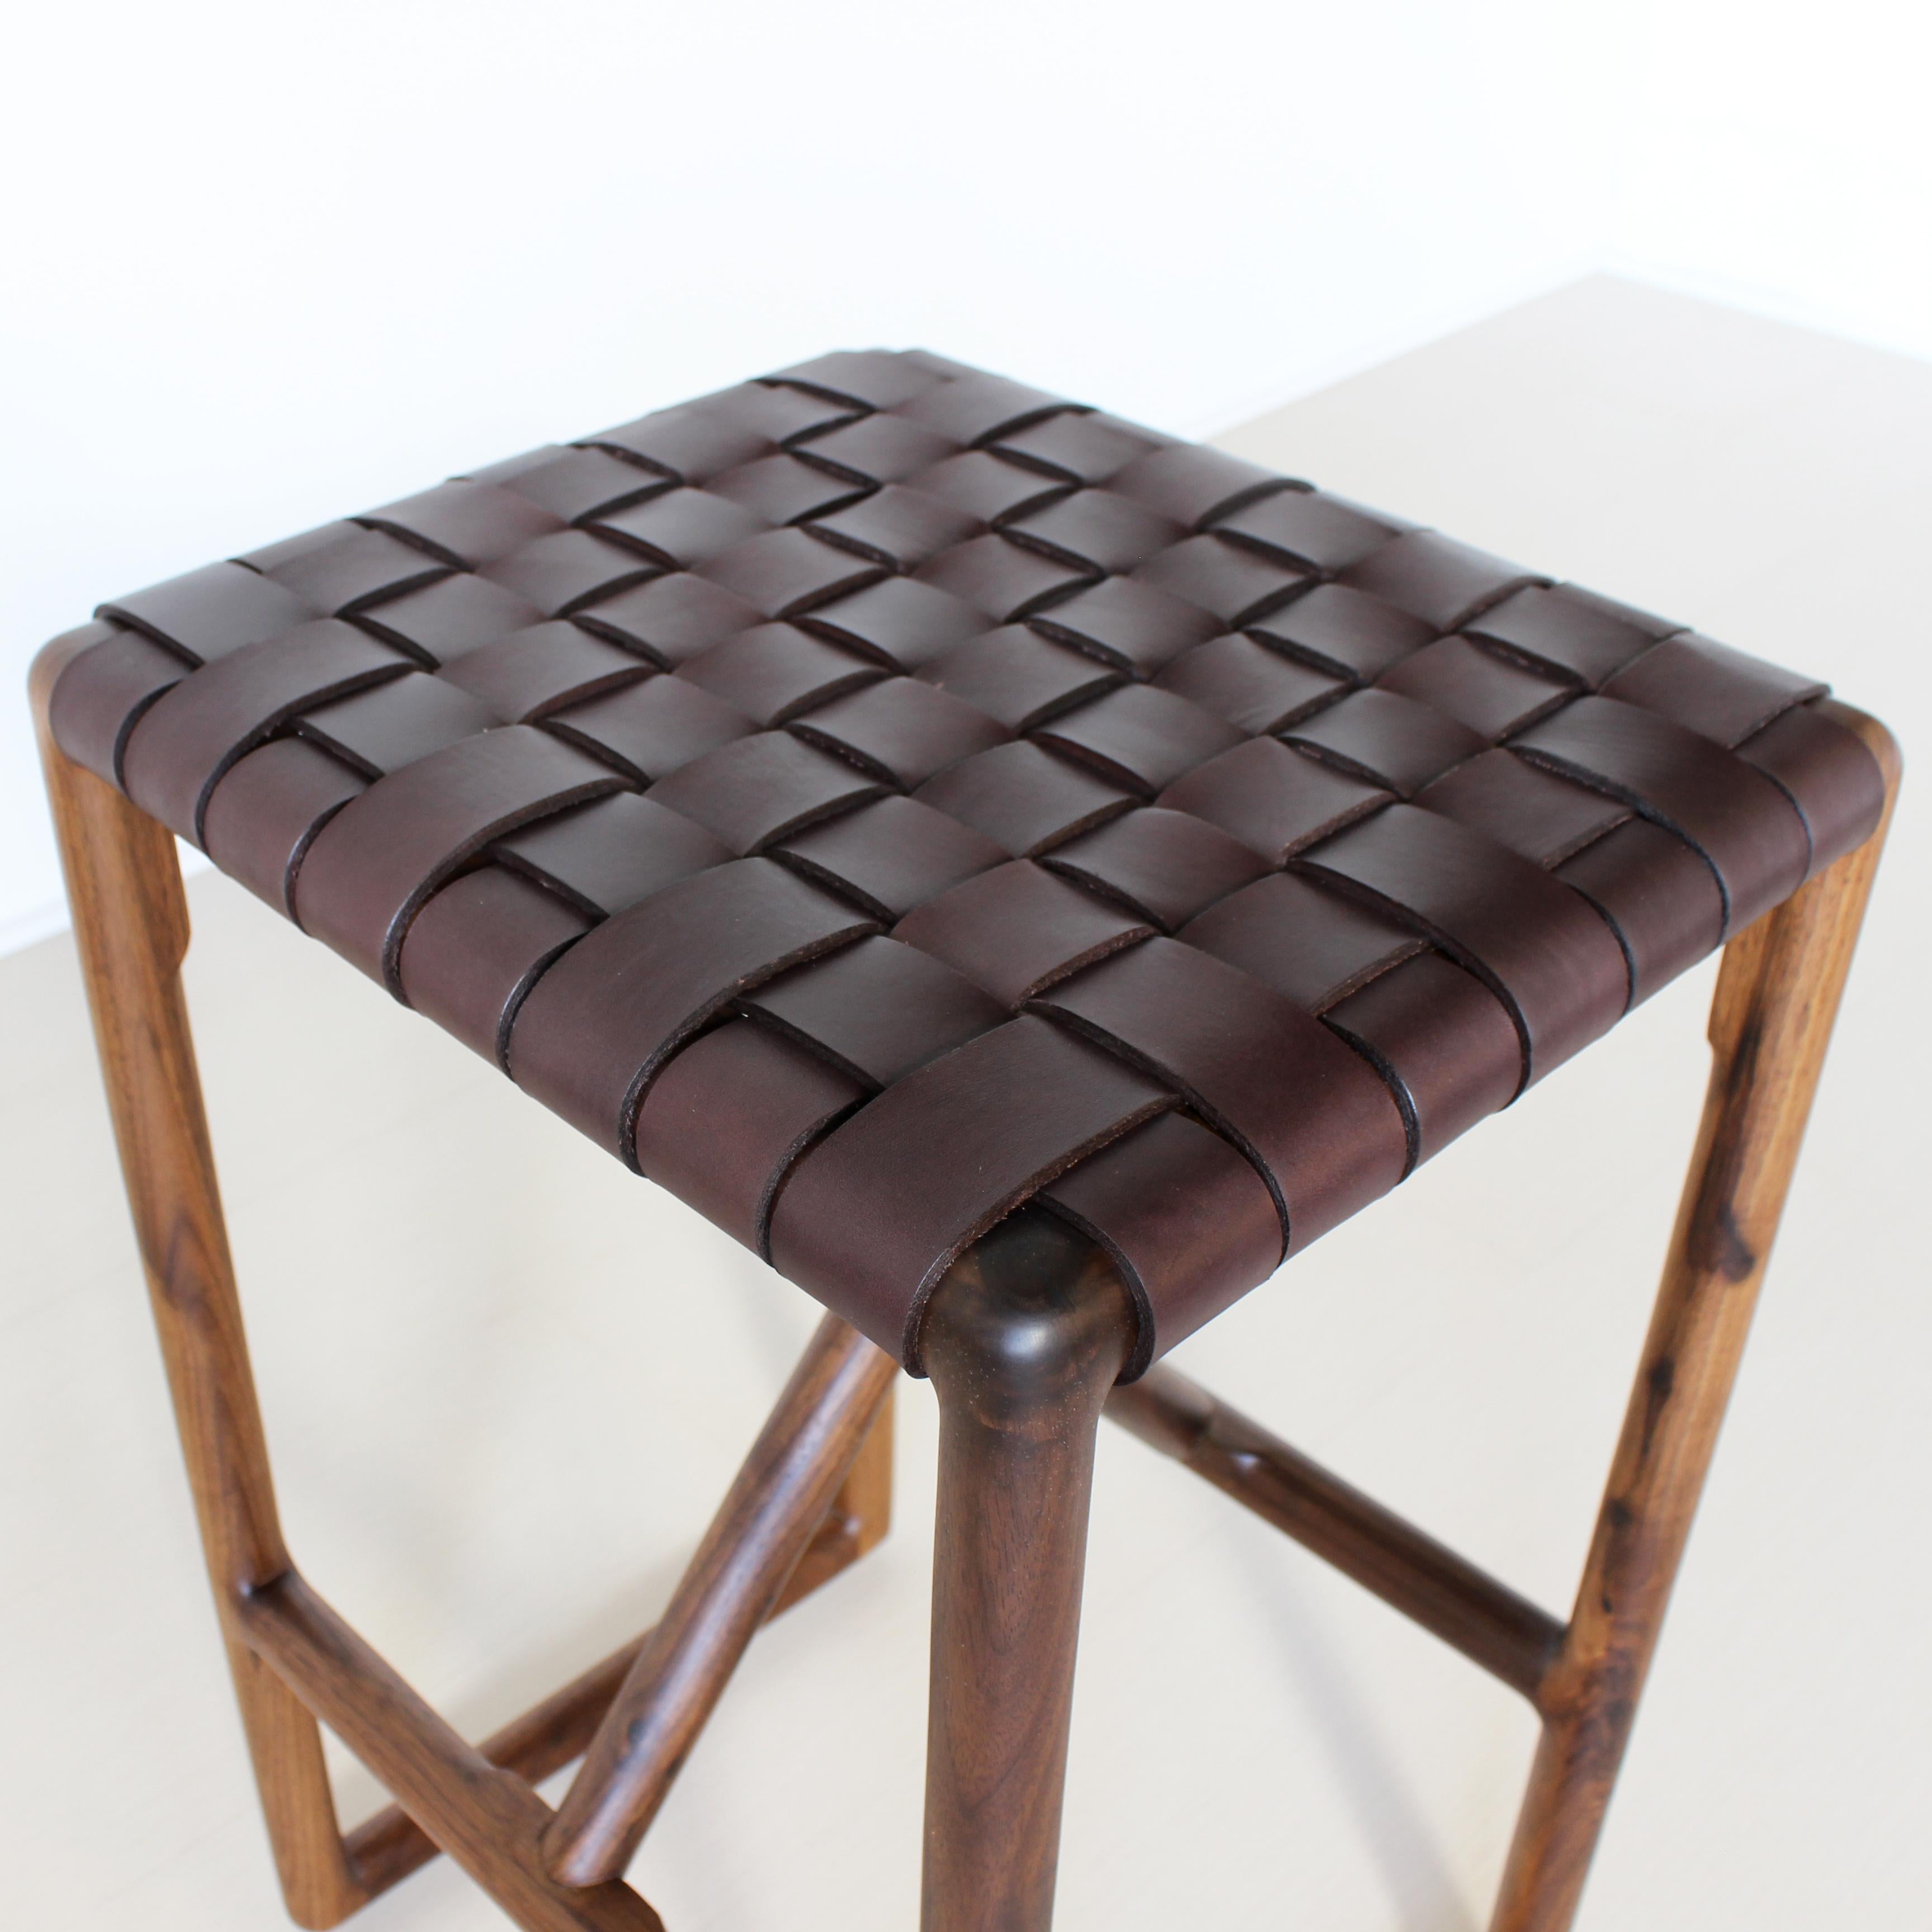 Montgomery Stool
by Crump and Kwash

Solid wood frame / handwoven vegetable tanned leather seat / no VOC oil finish

Dimensions: 
16 W X 14 D X 24 H
16 W X 14 D X 30 H

Wood: Walnut, Maple, Blackened Oak, White Oak

Leather: Natural, Black, Brown,